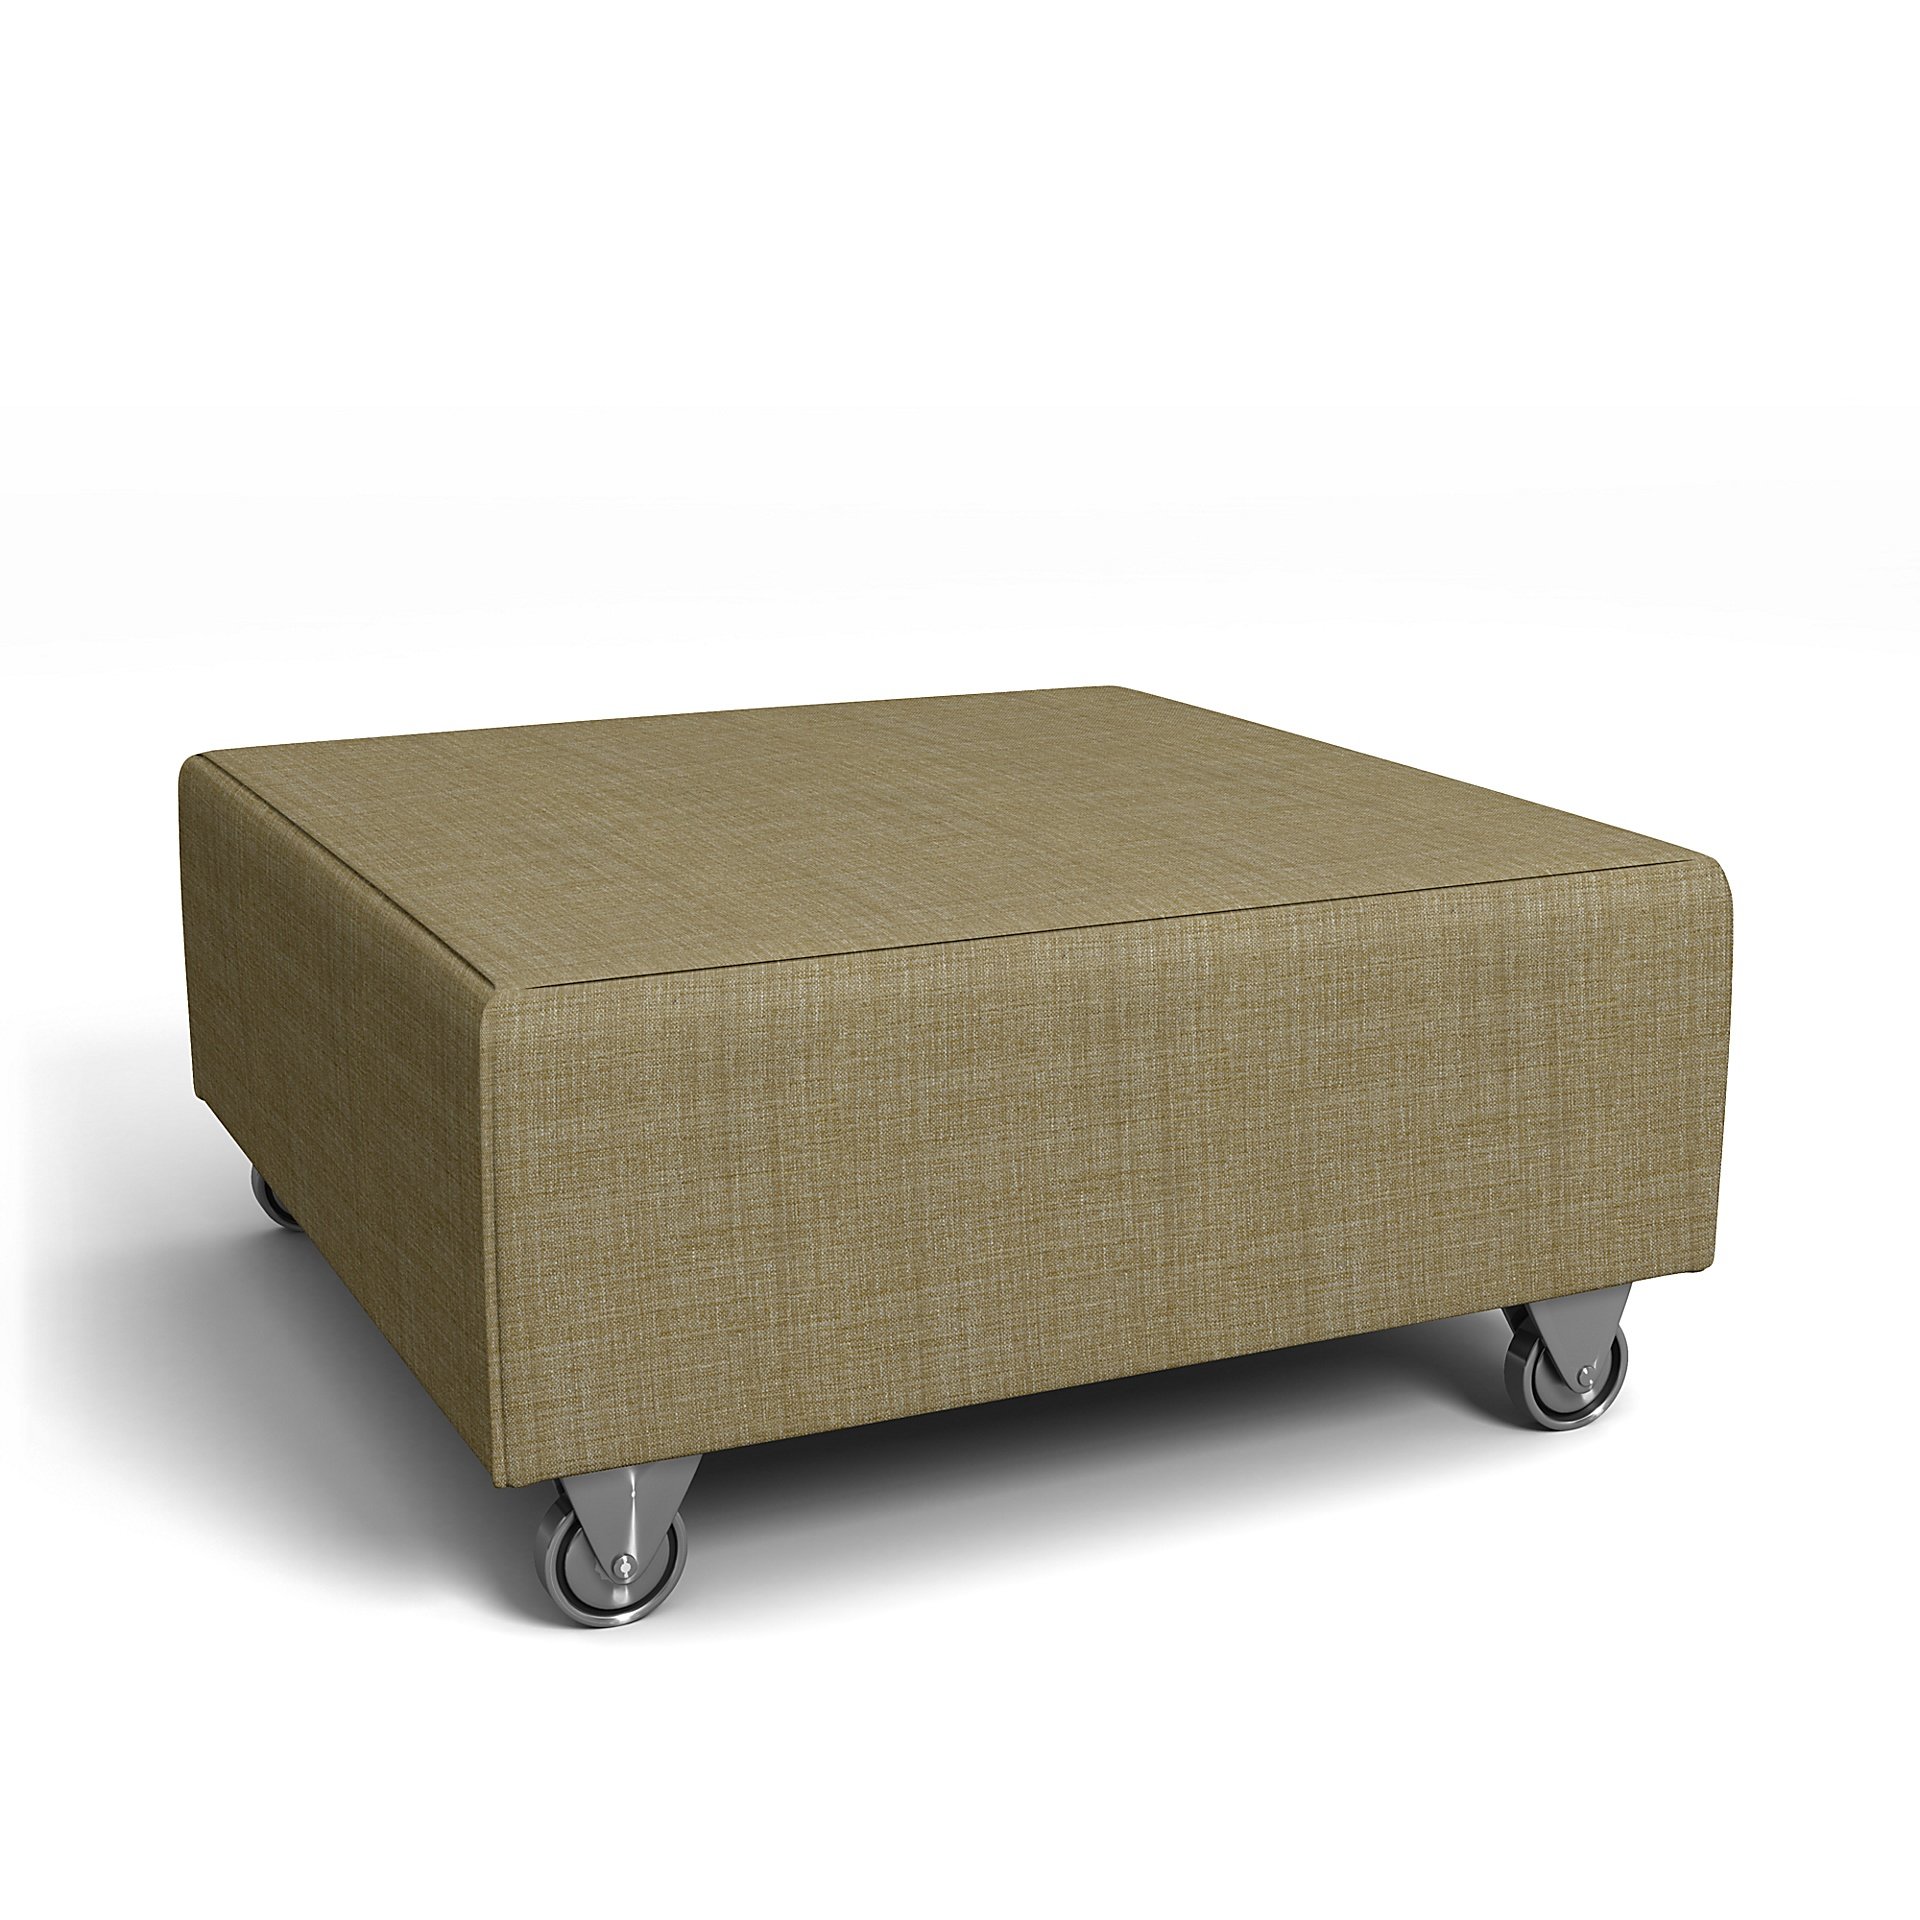 IKEA - Falsterbo Footstool Cover, Dusty Yellow, Boucle & Texture - Bemz